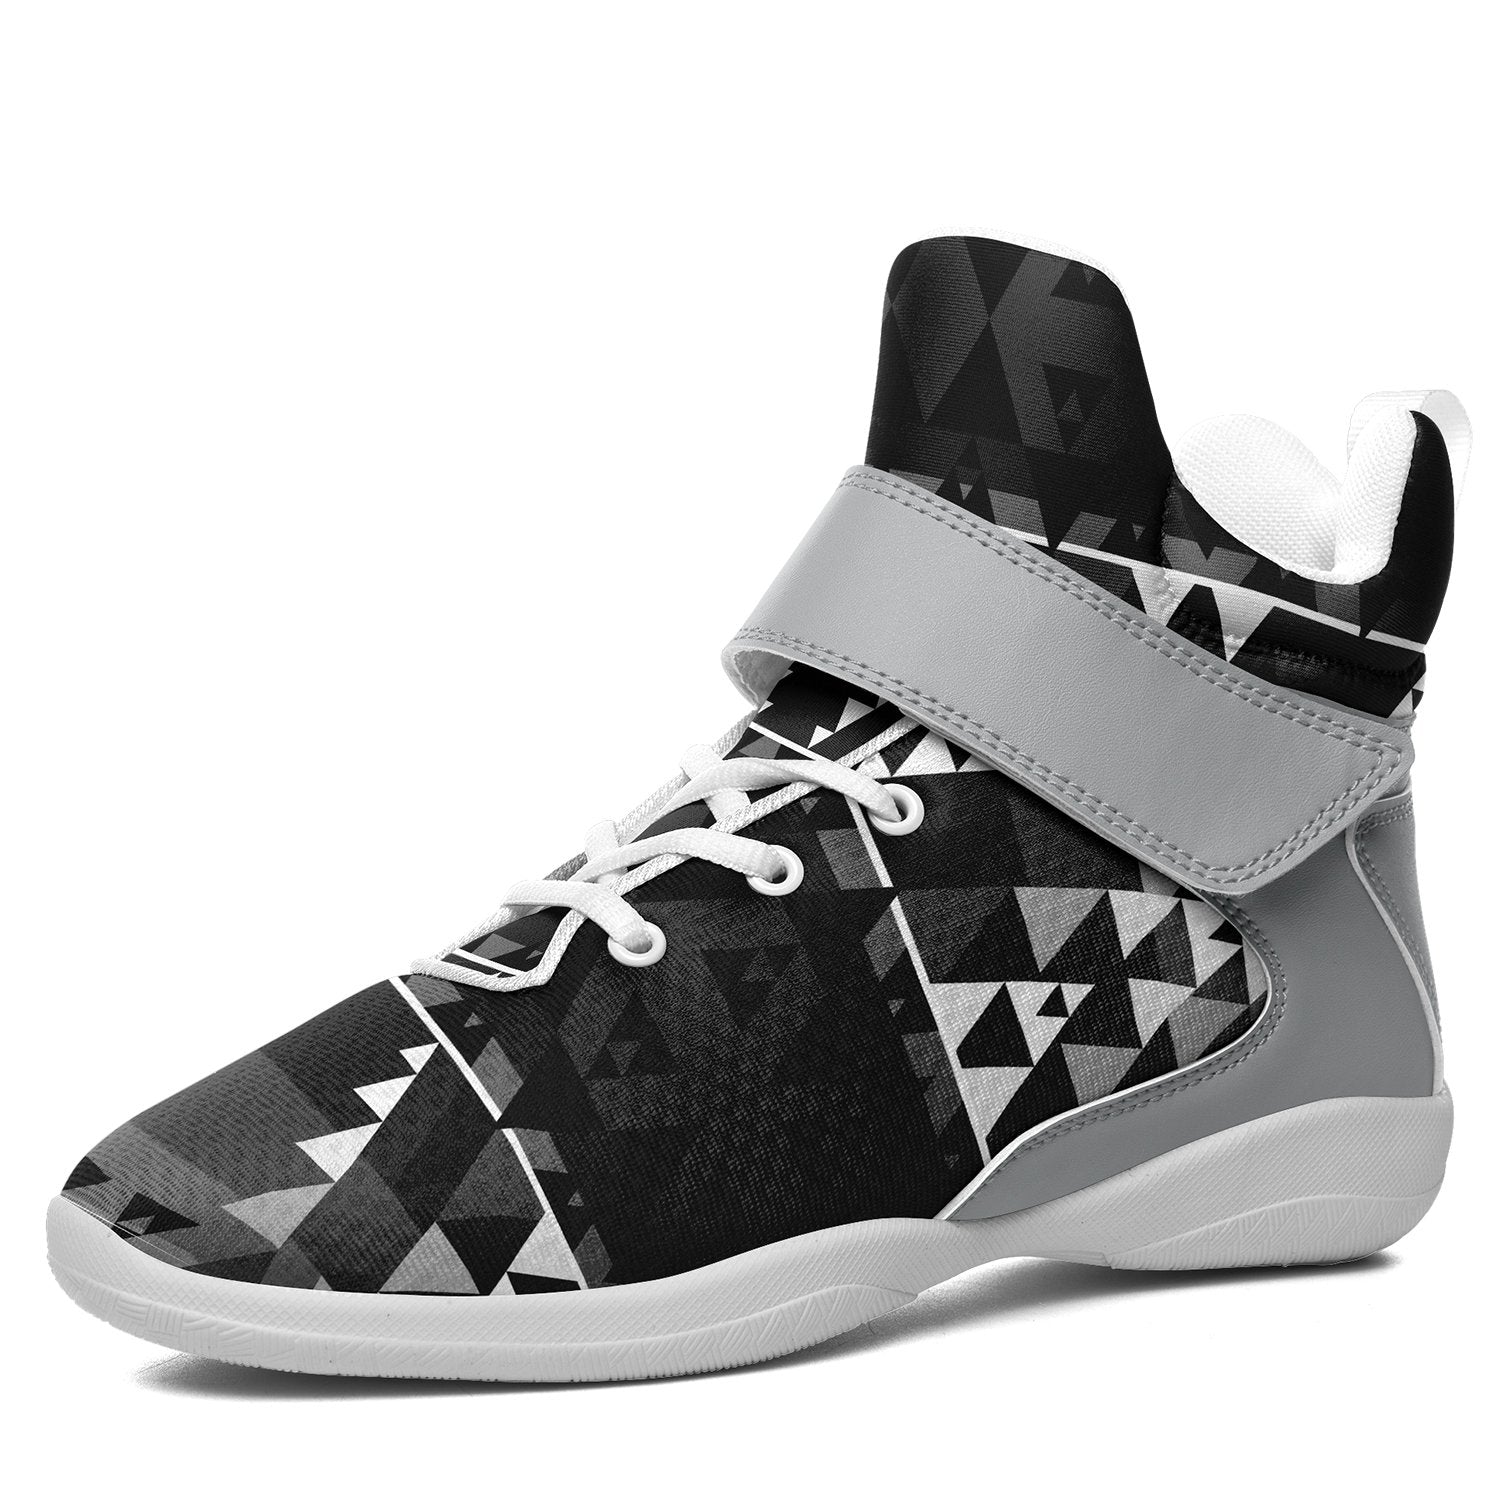 Writing on Stone Black and White Ipottaa Basketball / Sport High Top Shoes 49 Dzine 